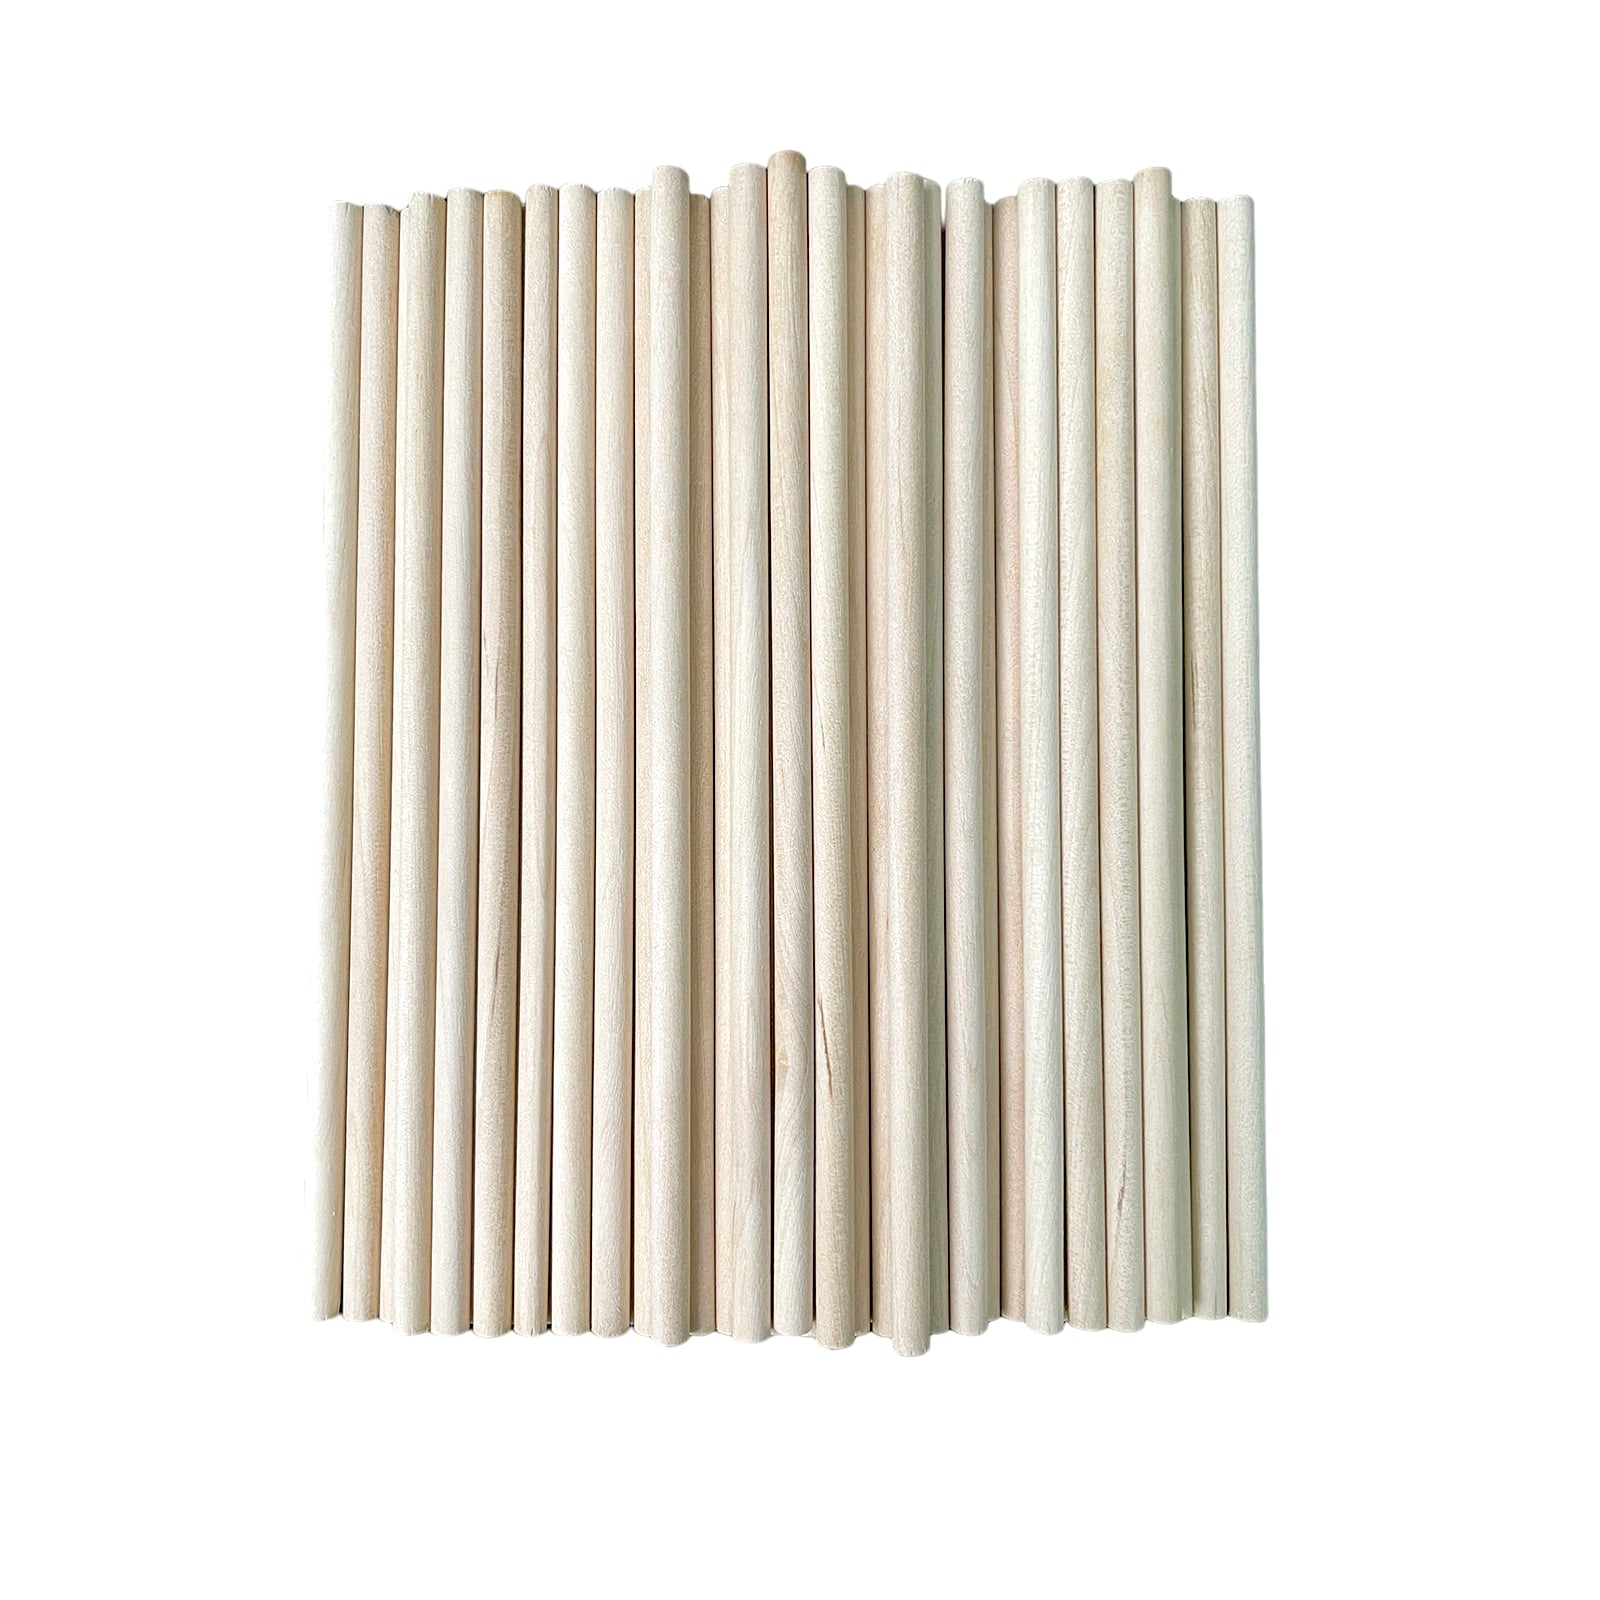 Dowel Rods Wood Sticks for Crafts – MIOUMEI